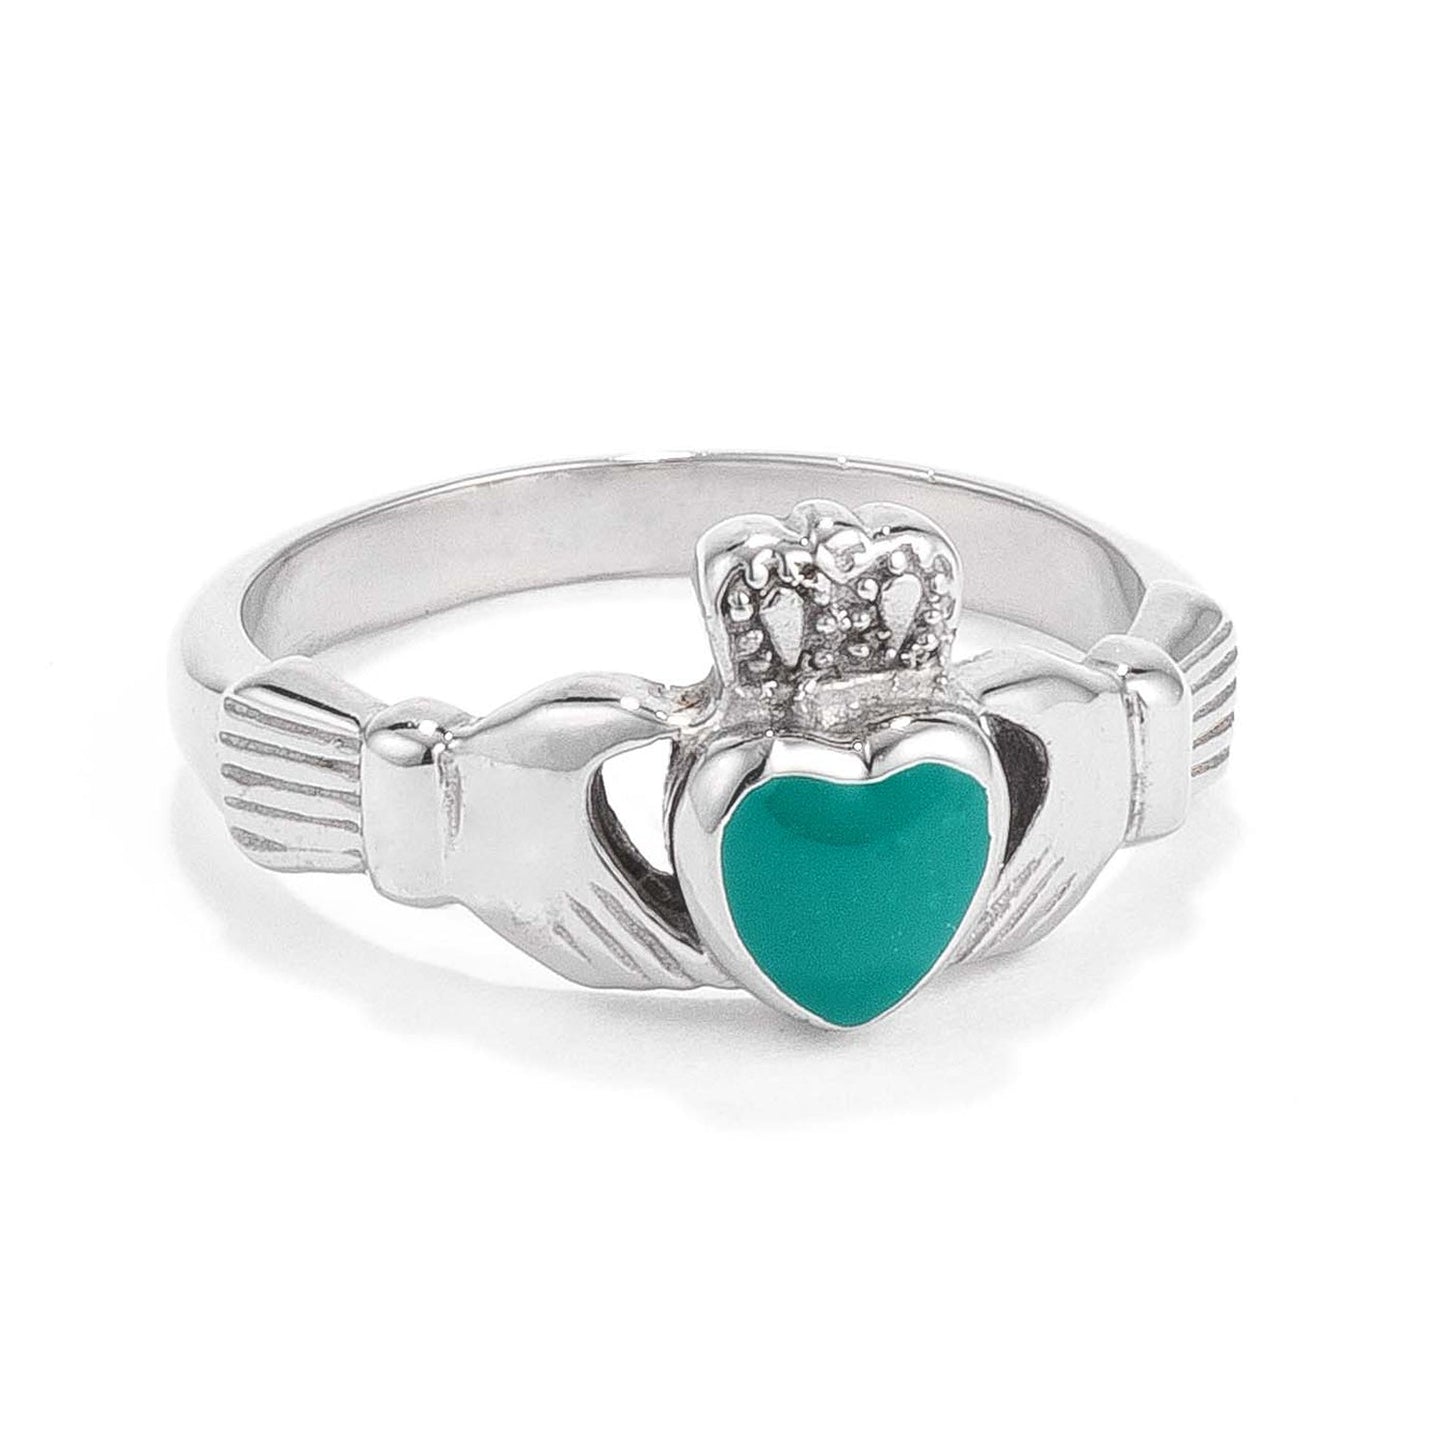 Stainless Steel Irish Claddagh Ring with Green Enamel Heart